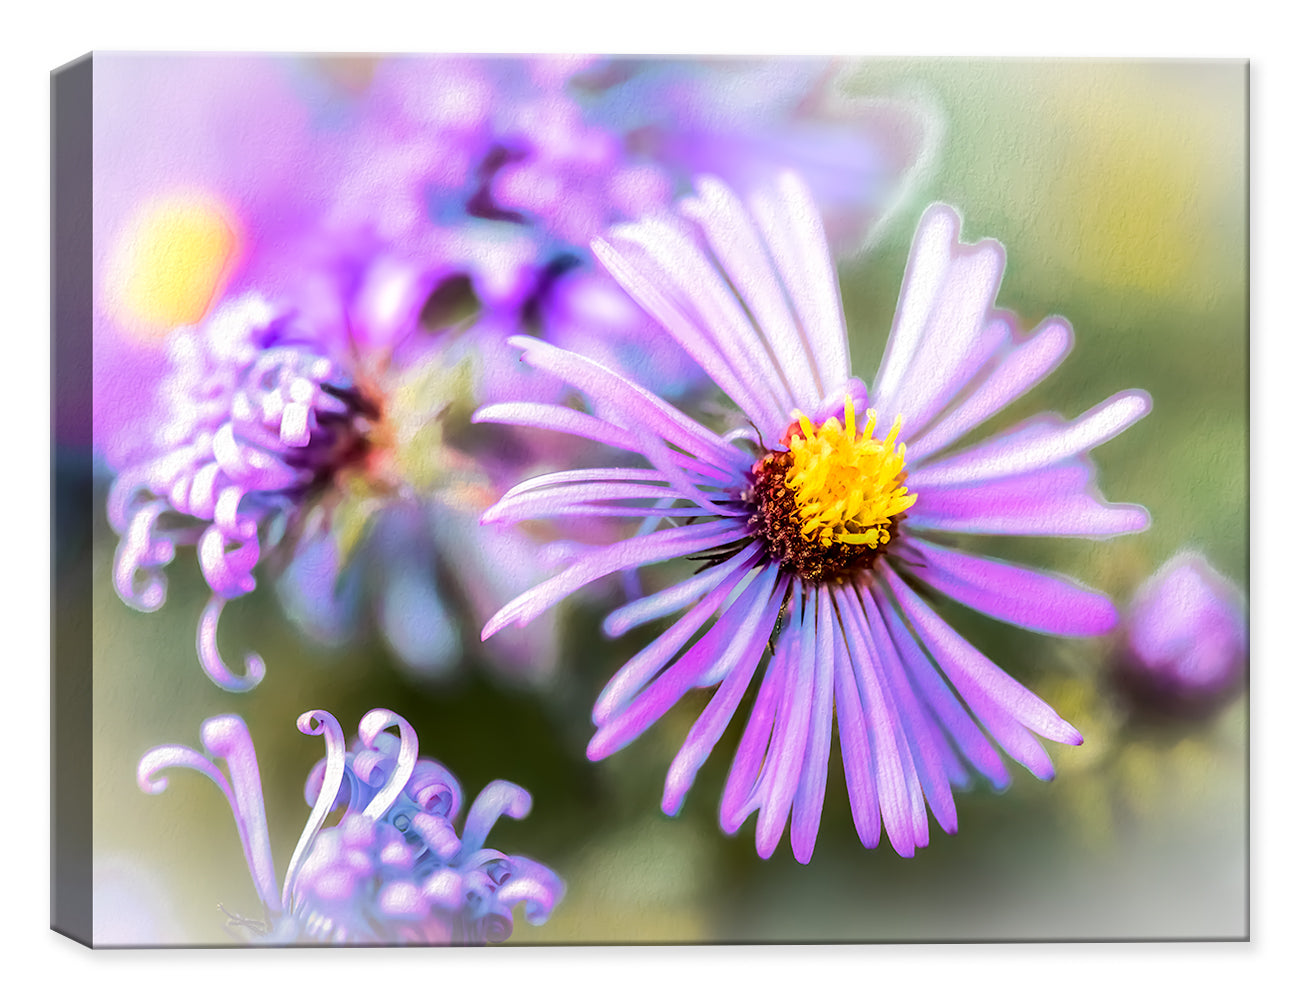 Wildflower - Pastels by Ray Huffman